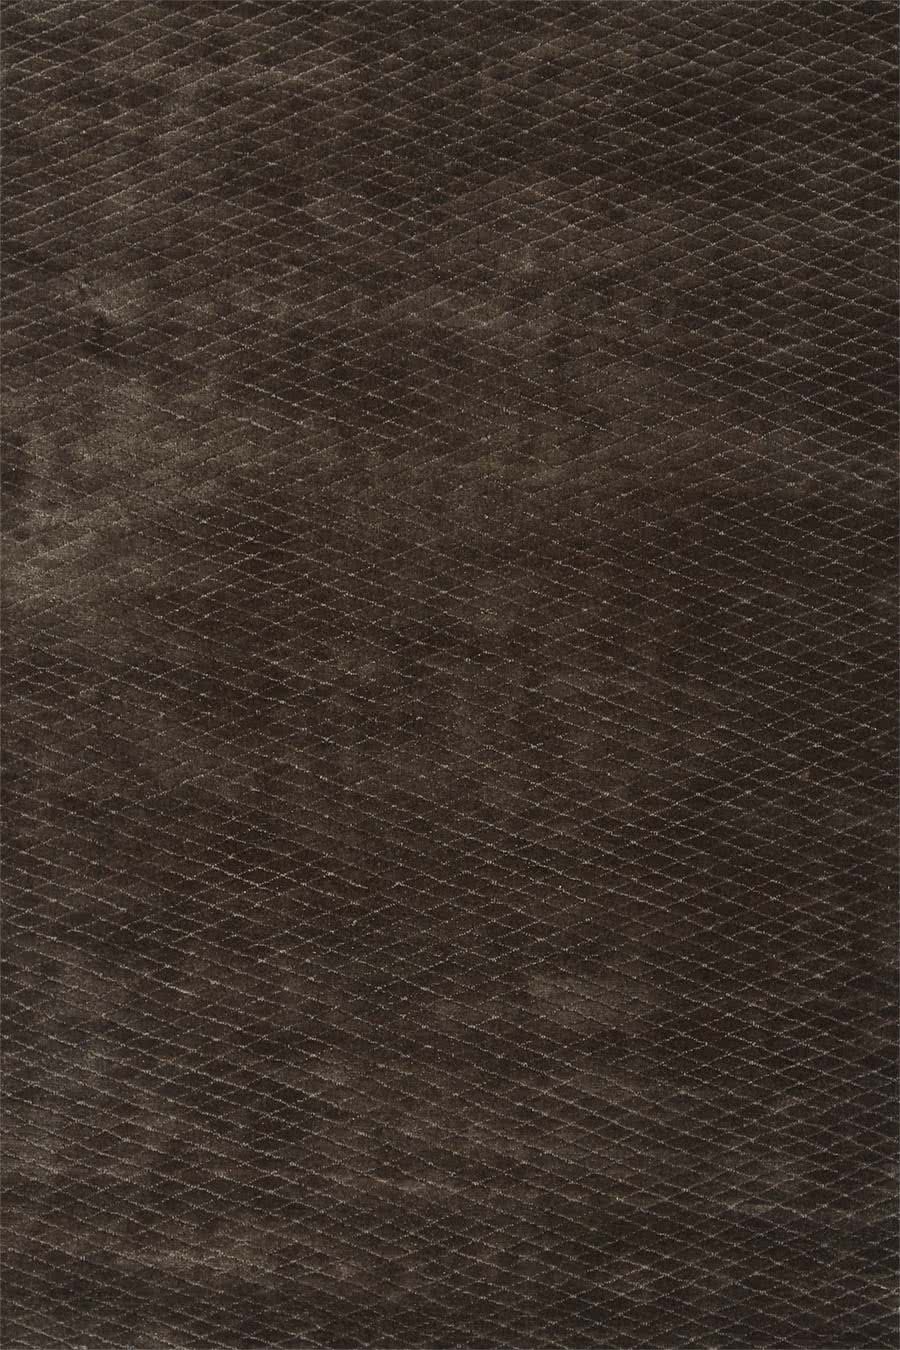 Overhead view of textured Diamond Velour rug in dark brown colour